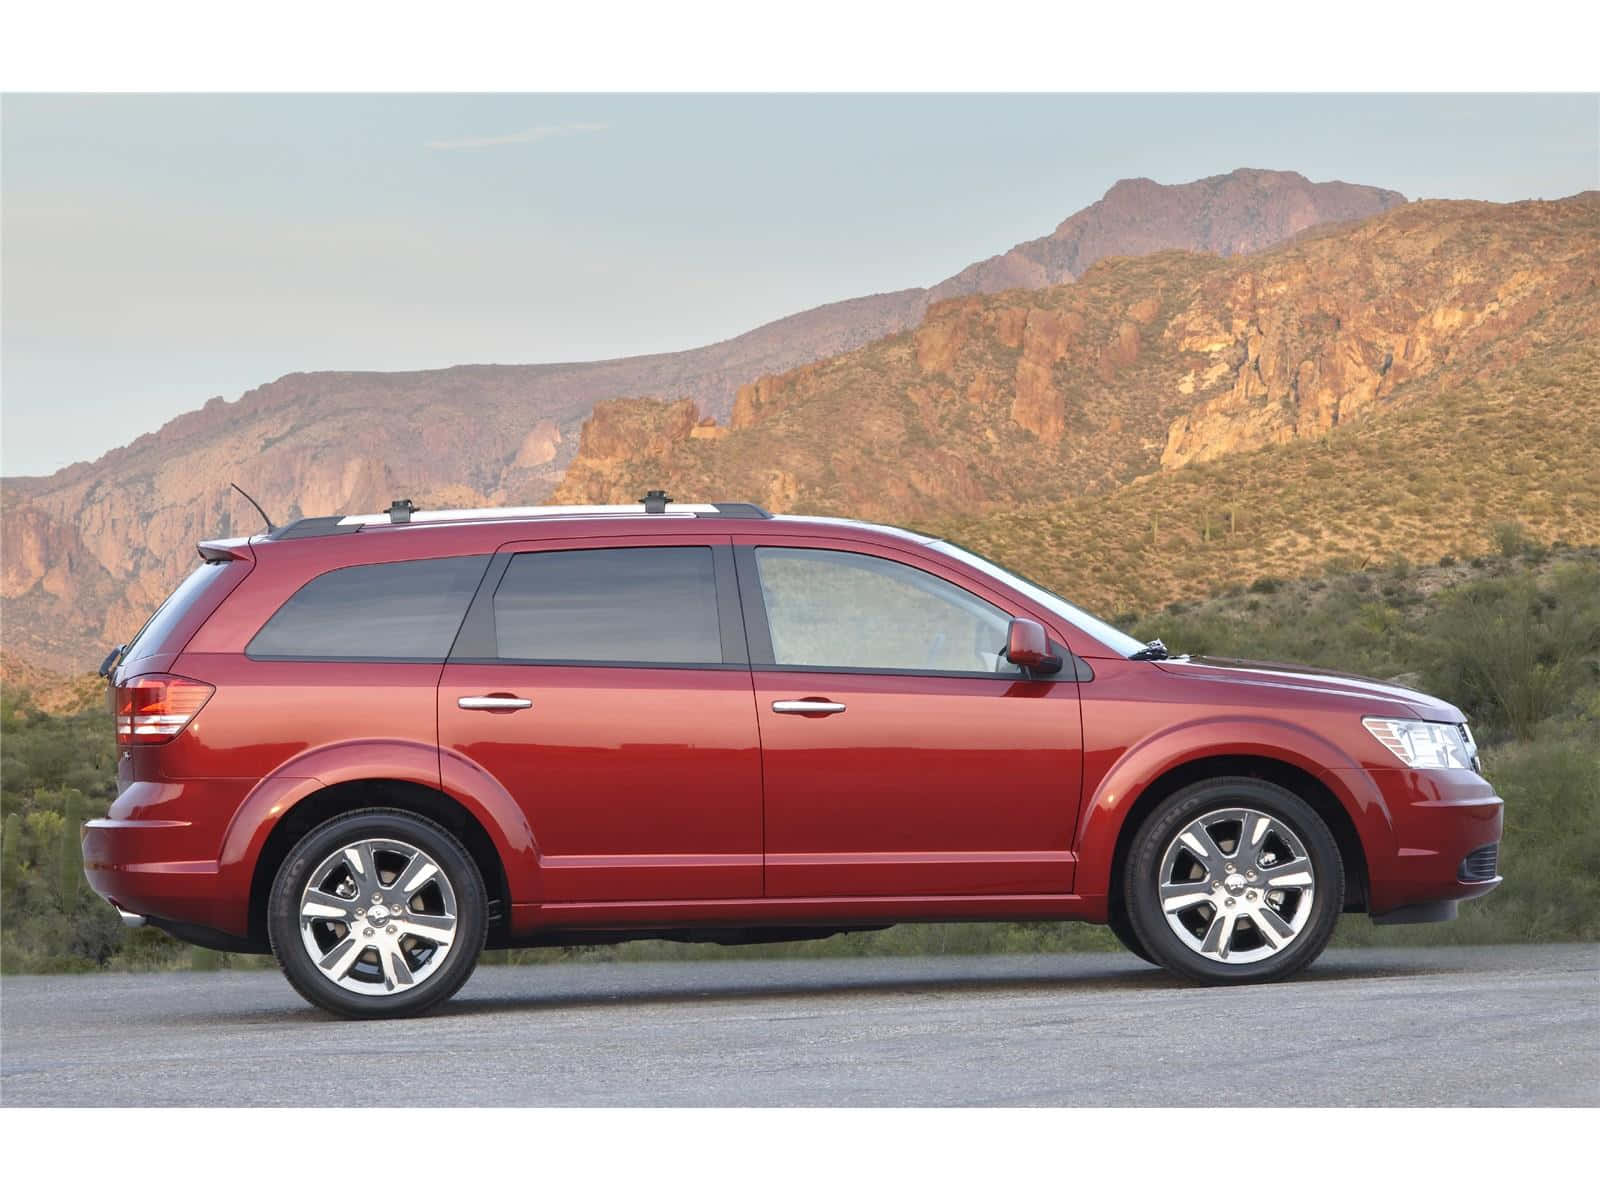 Caption: Conquering Terrain With Dodge Journey Wallpaper